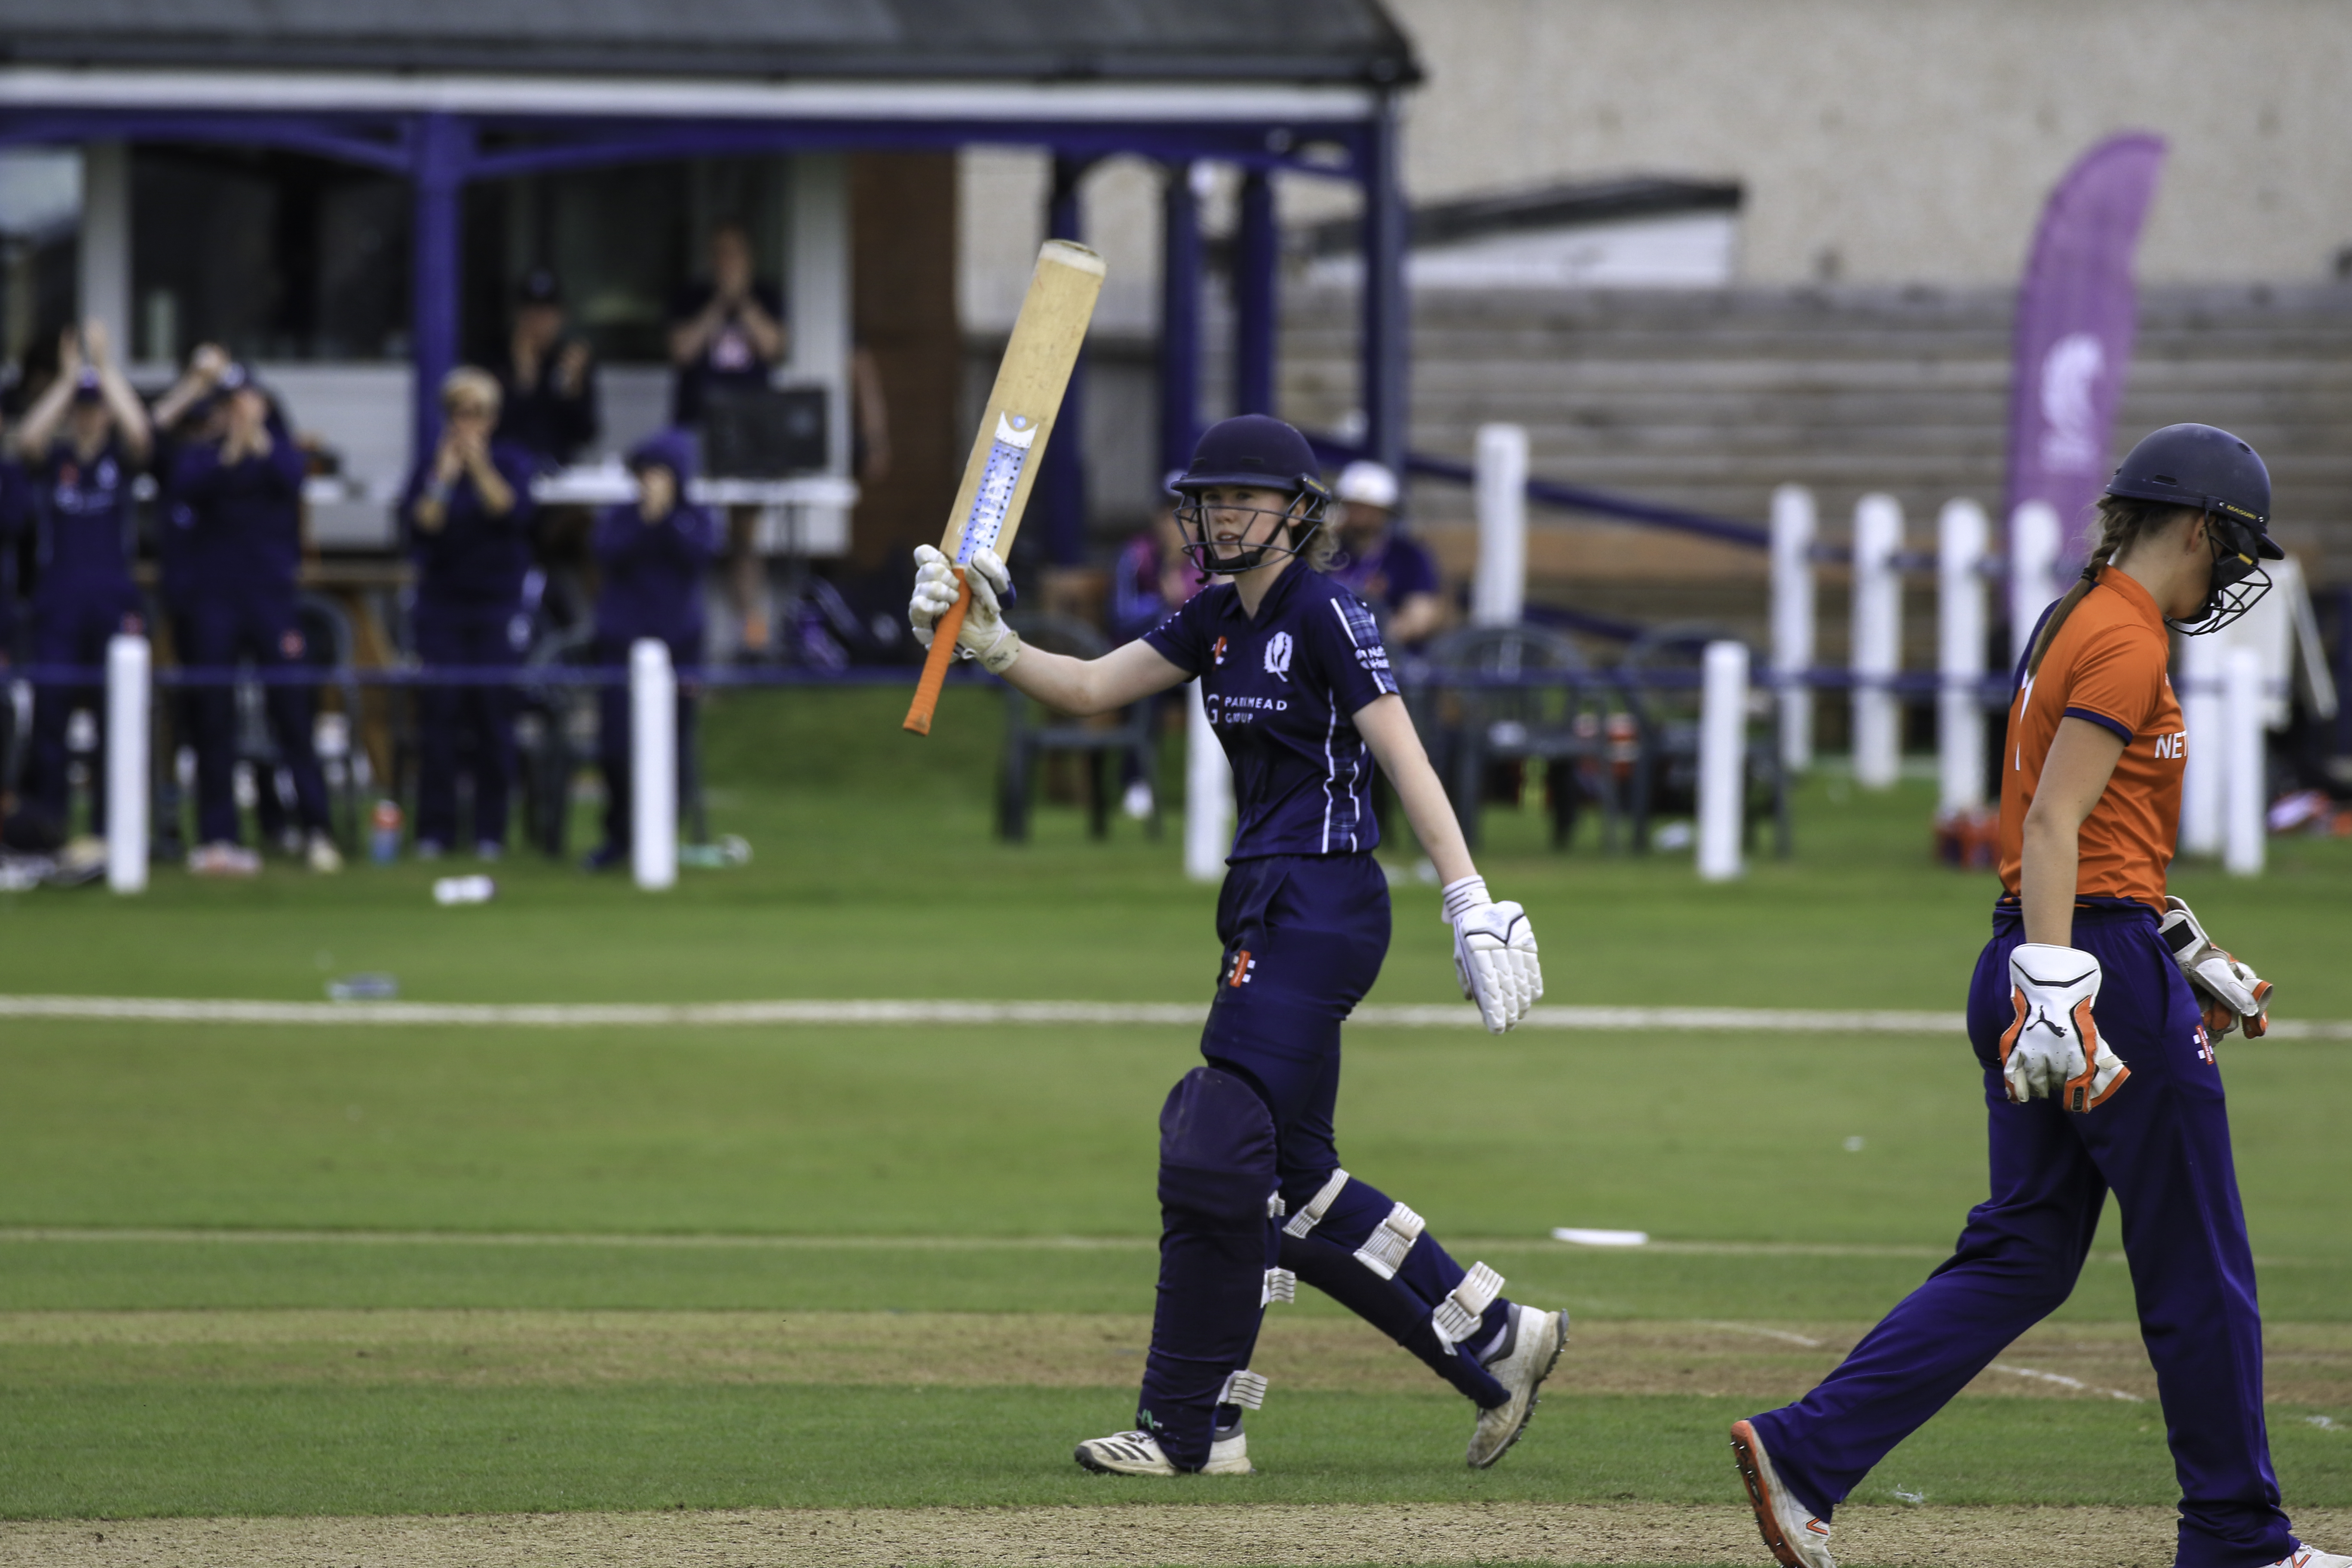 Bryce sisters’ masterclass sees Scotland end on a high